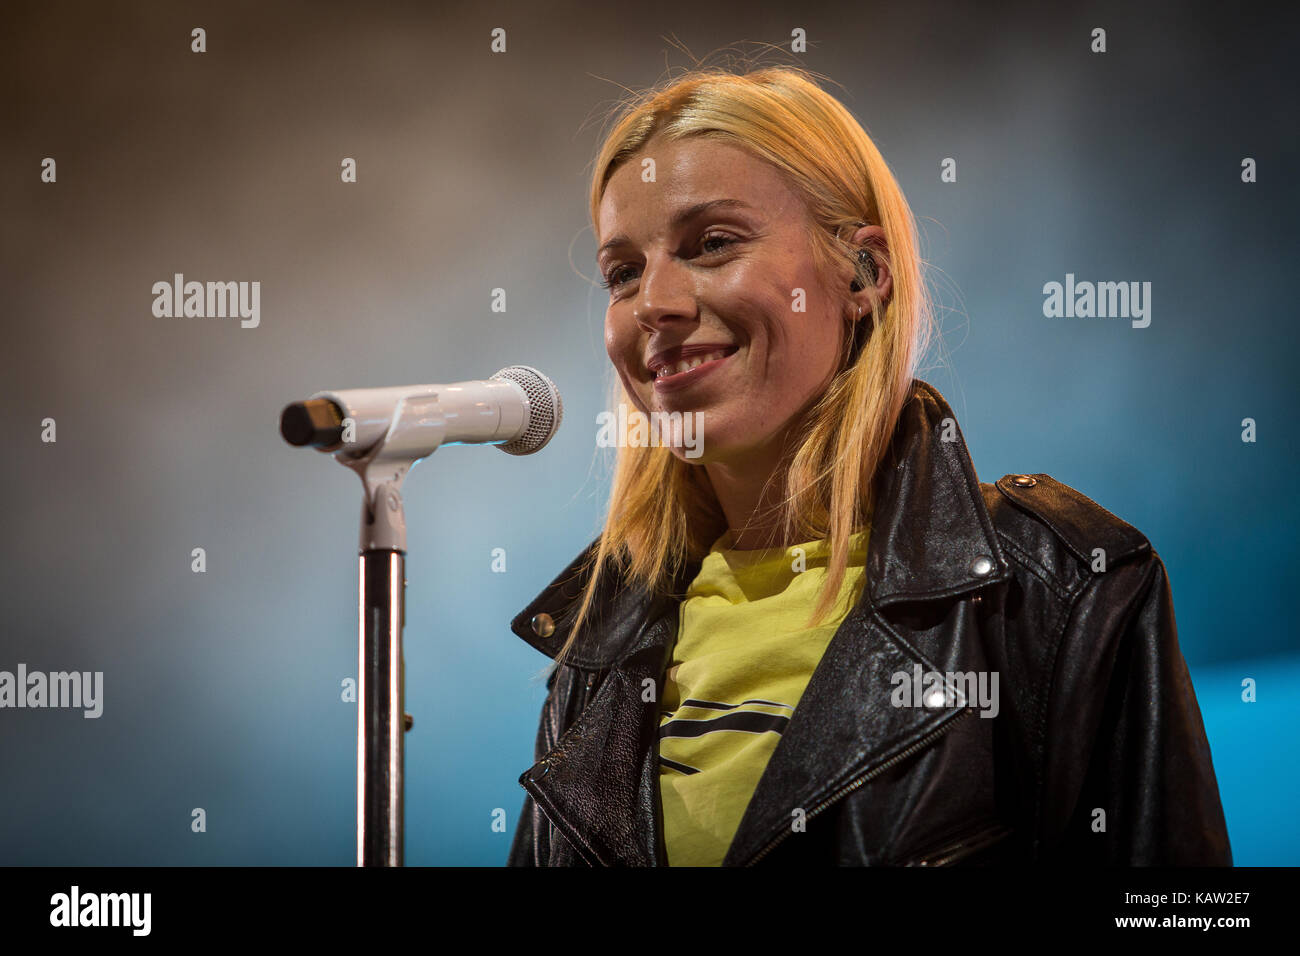 Norway, Oslo – August 10, 2017. The Norwegian singer, songwriter and musician Gabrielle Susanne Solheim Leithaug is best known just as Gabrille and here performs a live concert during the Norwegian music festival Øyafestivalen 2017 in Oslo. Stock Photo